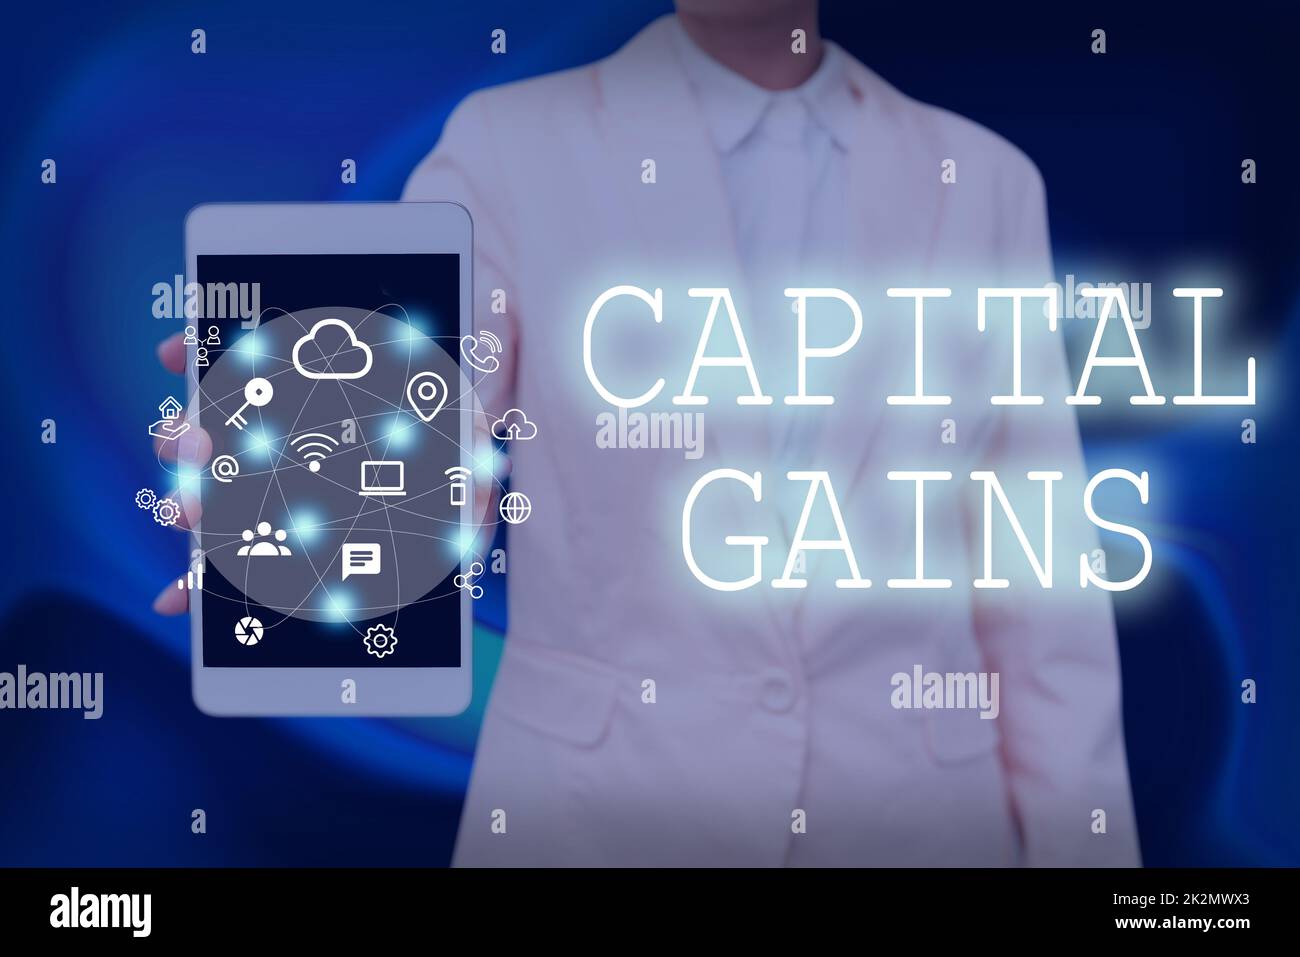 Writing displaying text Capital Gains. Word for Bonds Shares Stocks Profit Income Tax Investment Funds Lady Pressing Screen Of Mobile Phone Showing The Futuristic Technology Stock Photo